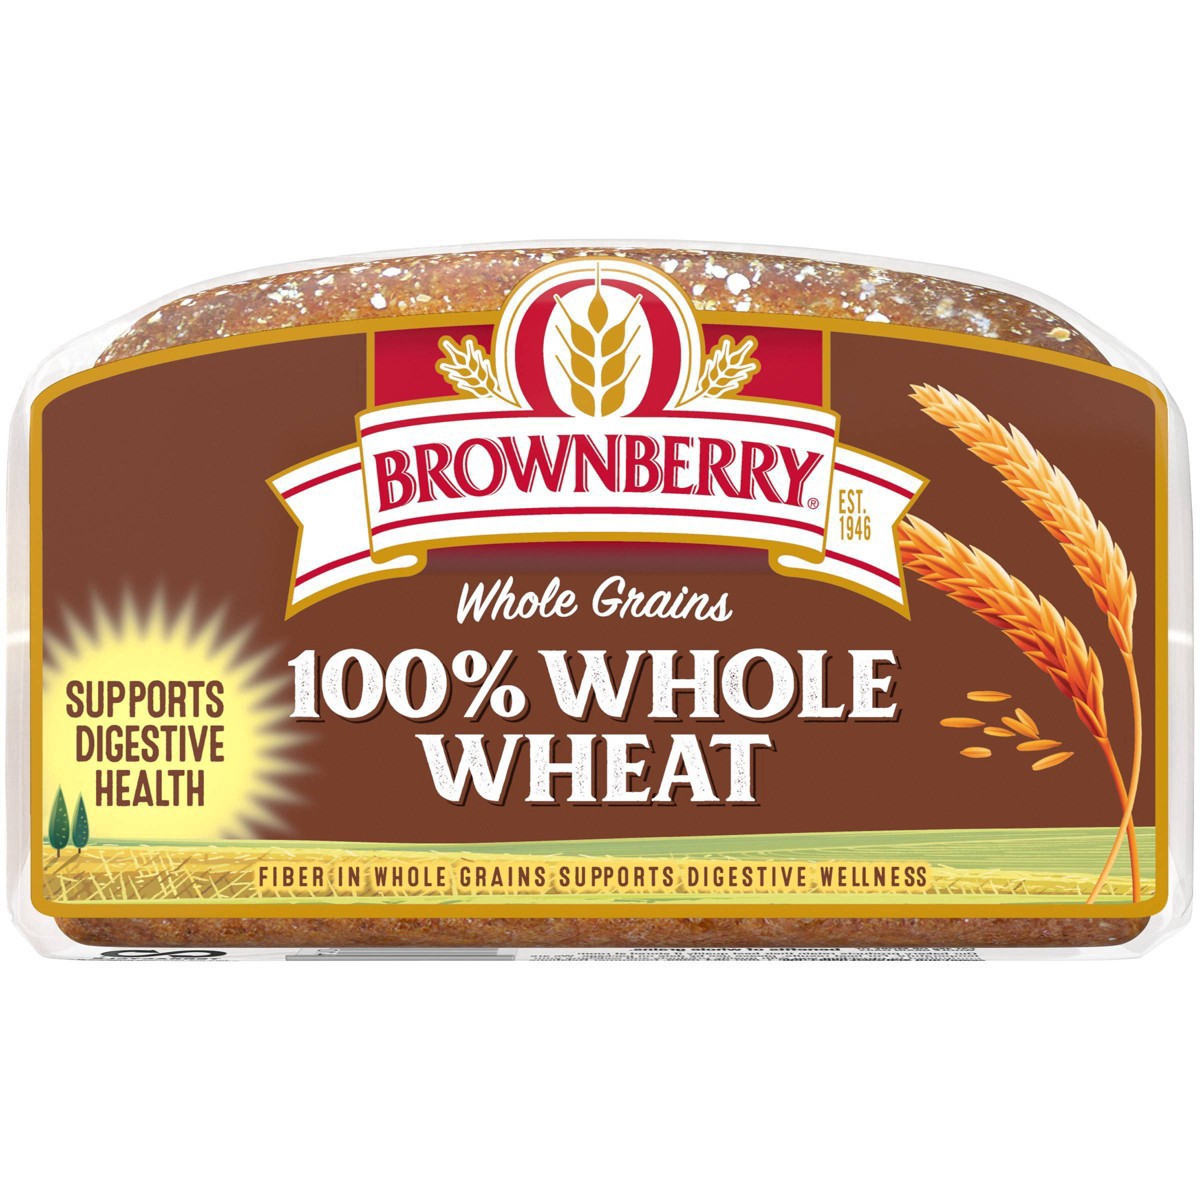 slide 7 of 23, Brownberry Whole Grains 100% Whole Wheat Bread, 24 oz, 1 ct